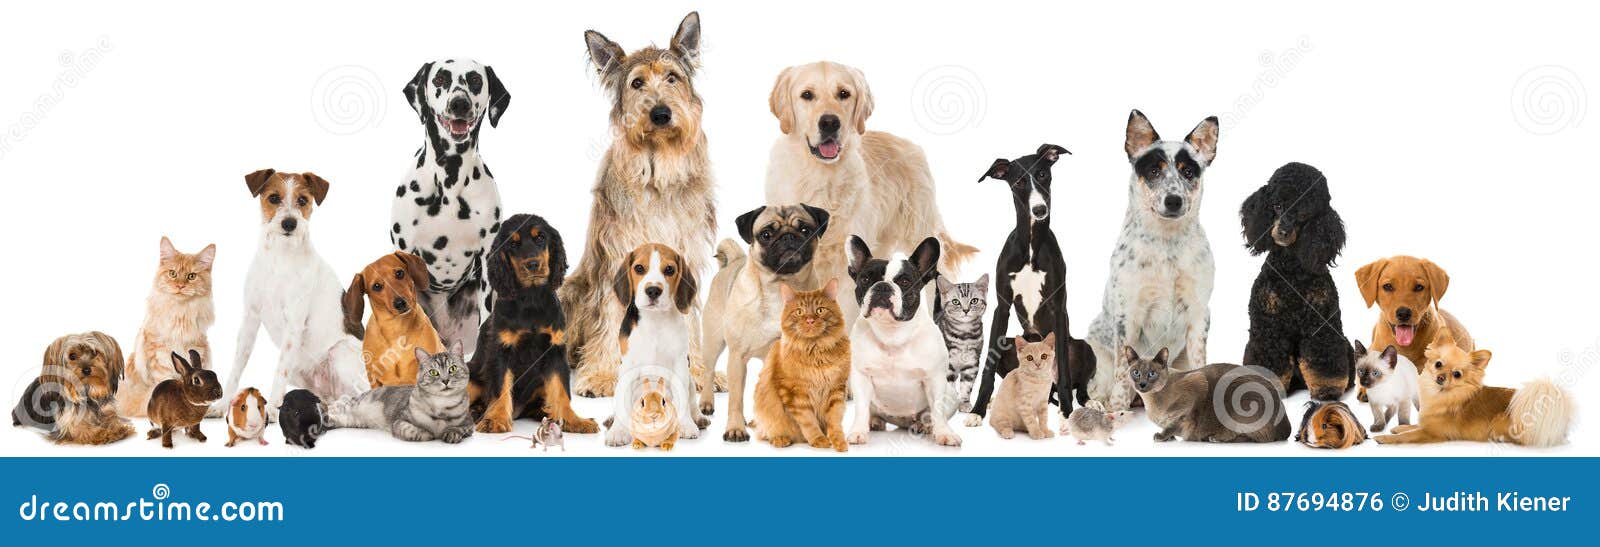 Pets Stock Photos - Royalty Free Pictures